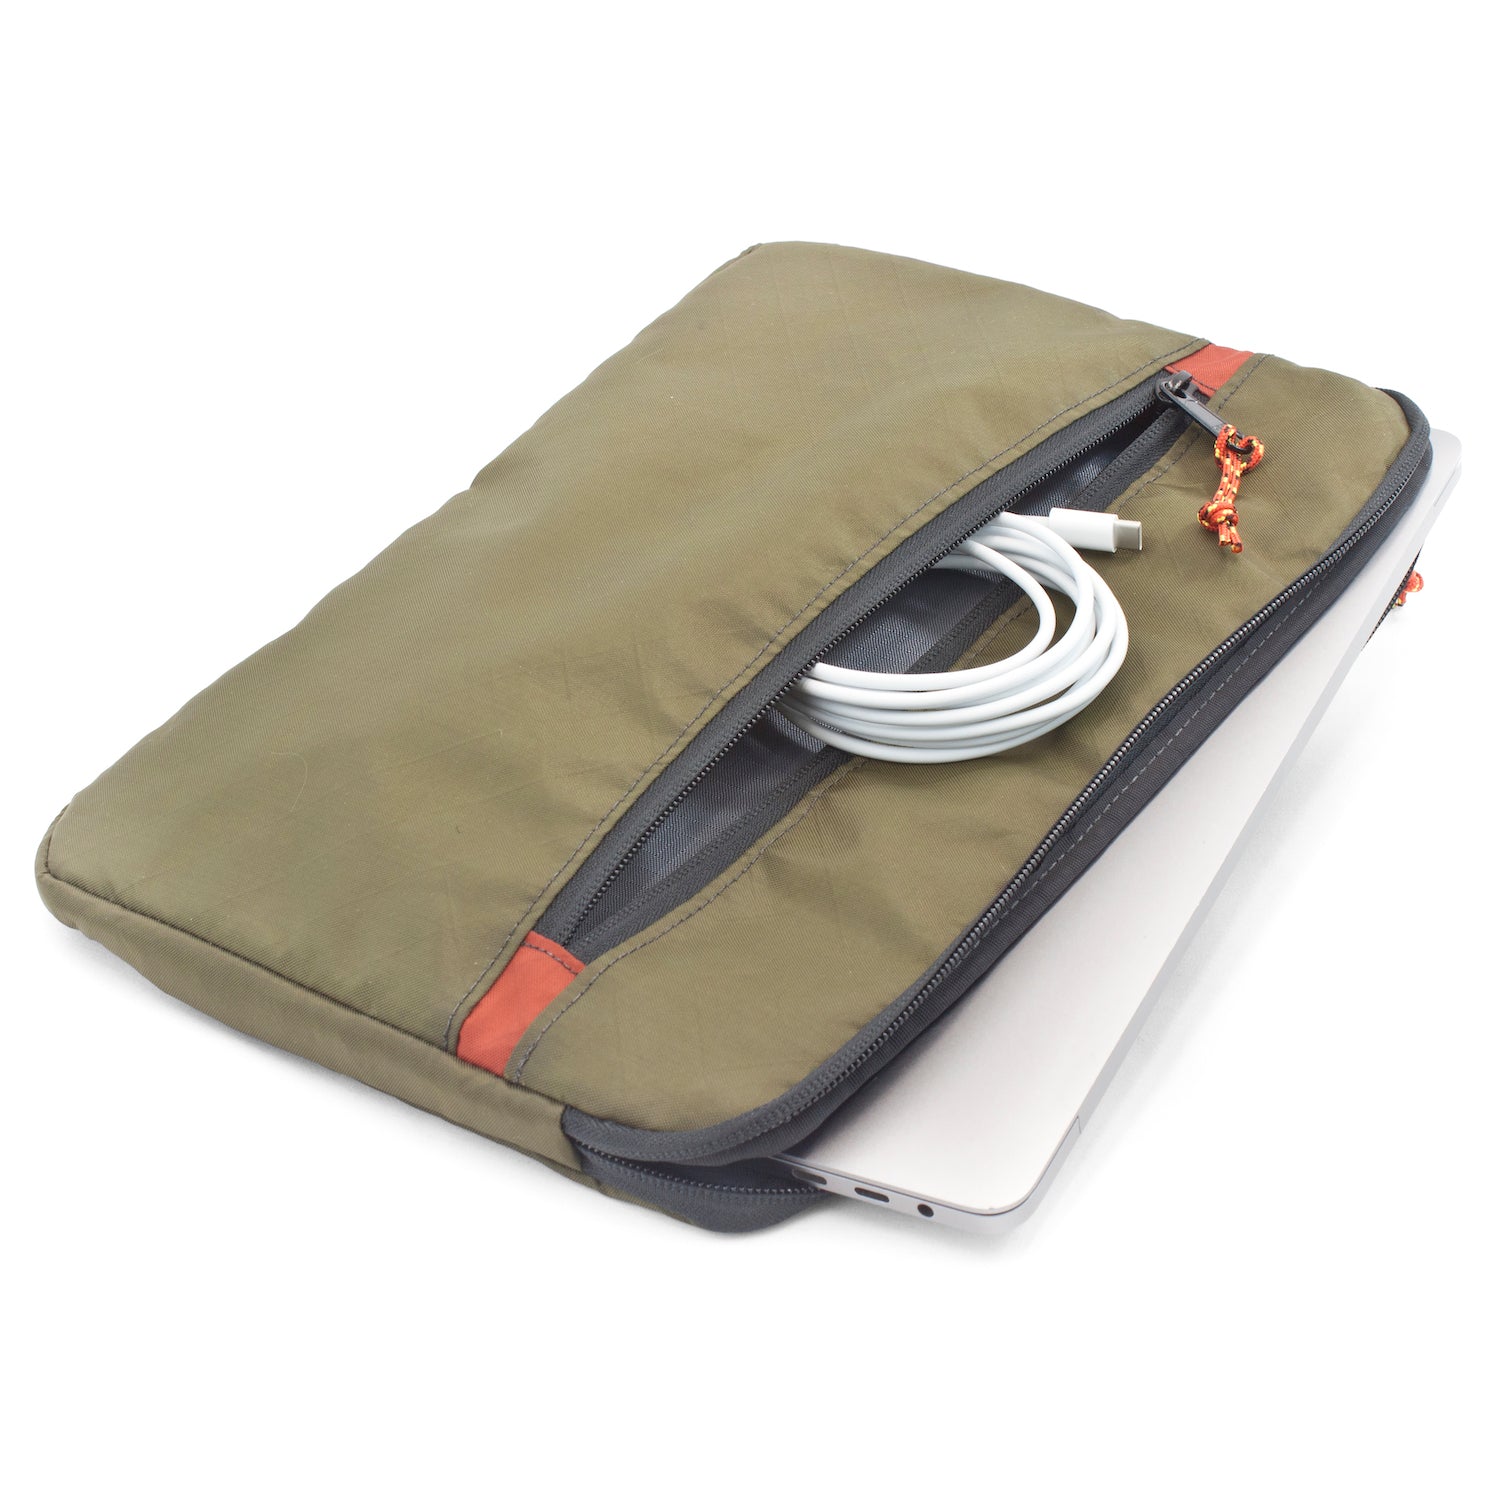 Flowfold Ally Laptop Case & water repellent recycled laptop sleeve made in USA Olive green and brick red 